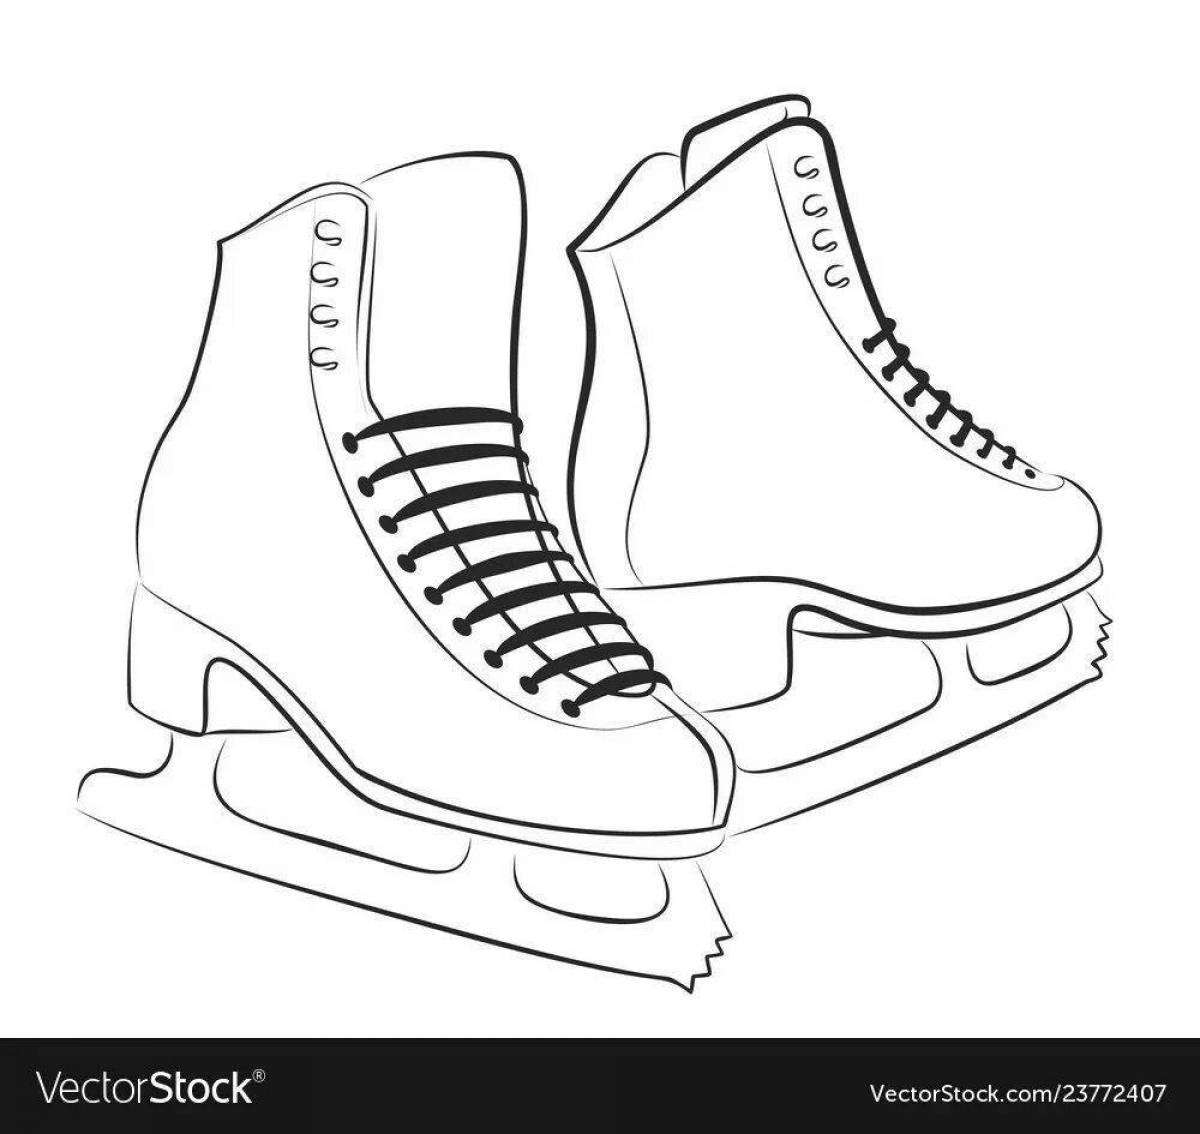 Coloring page dazzling figure skates